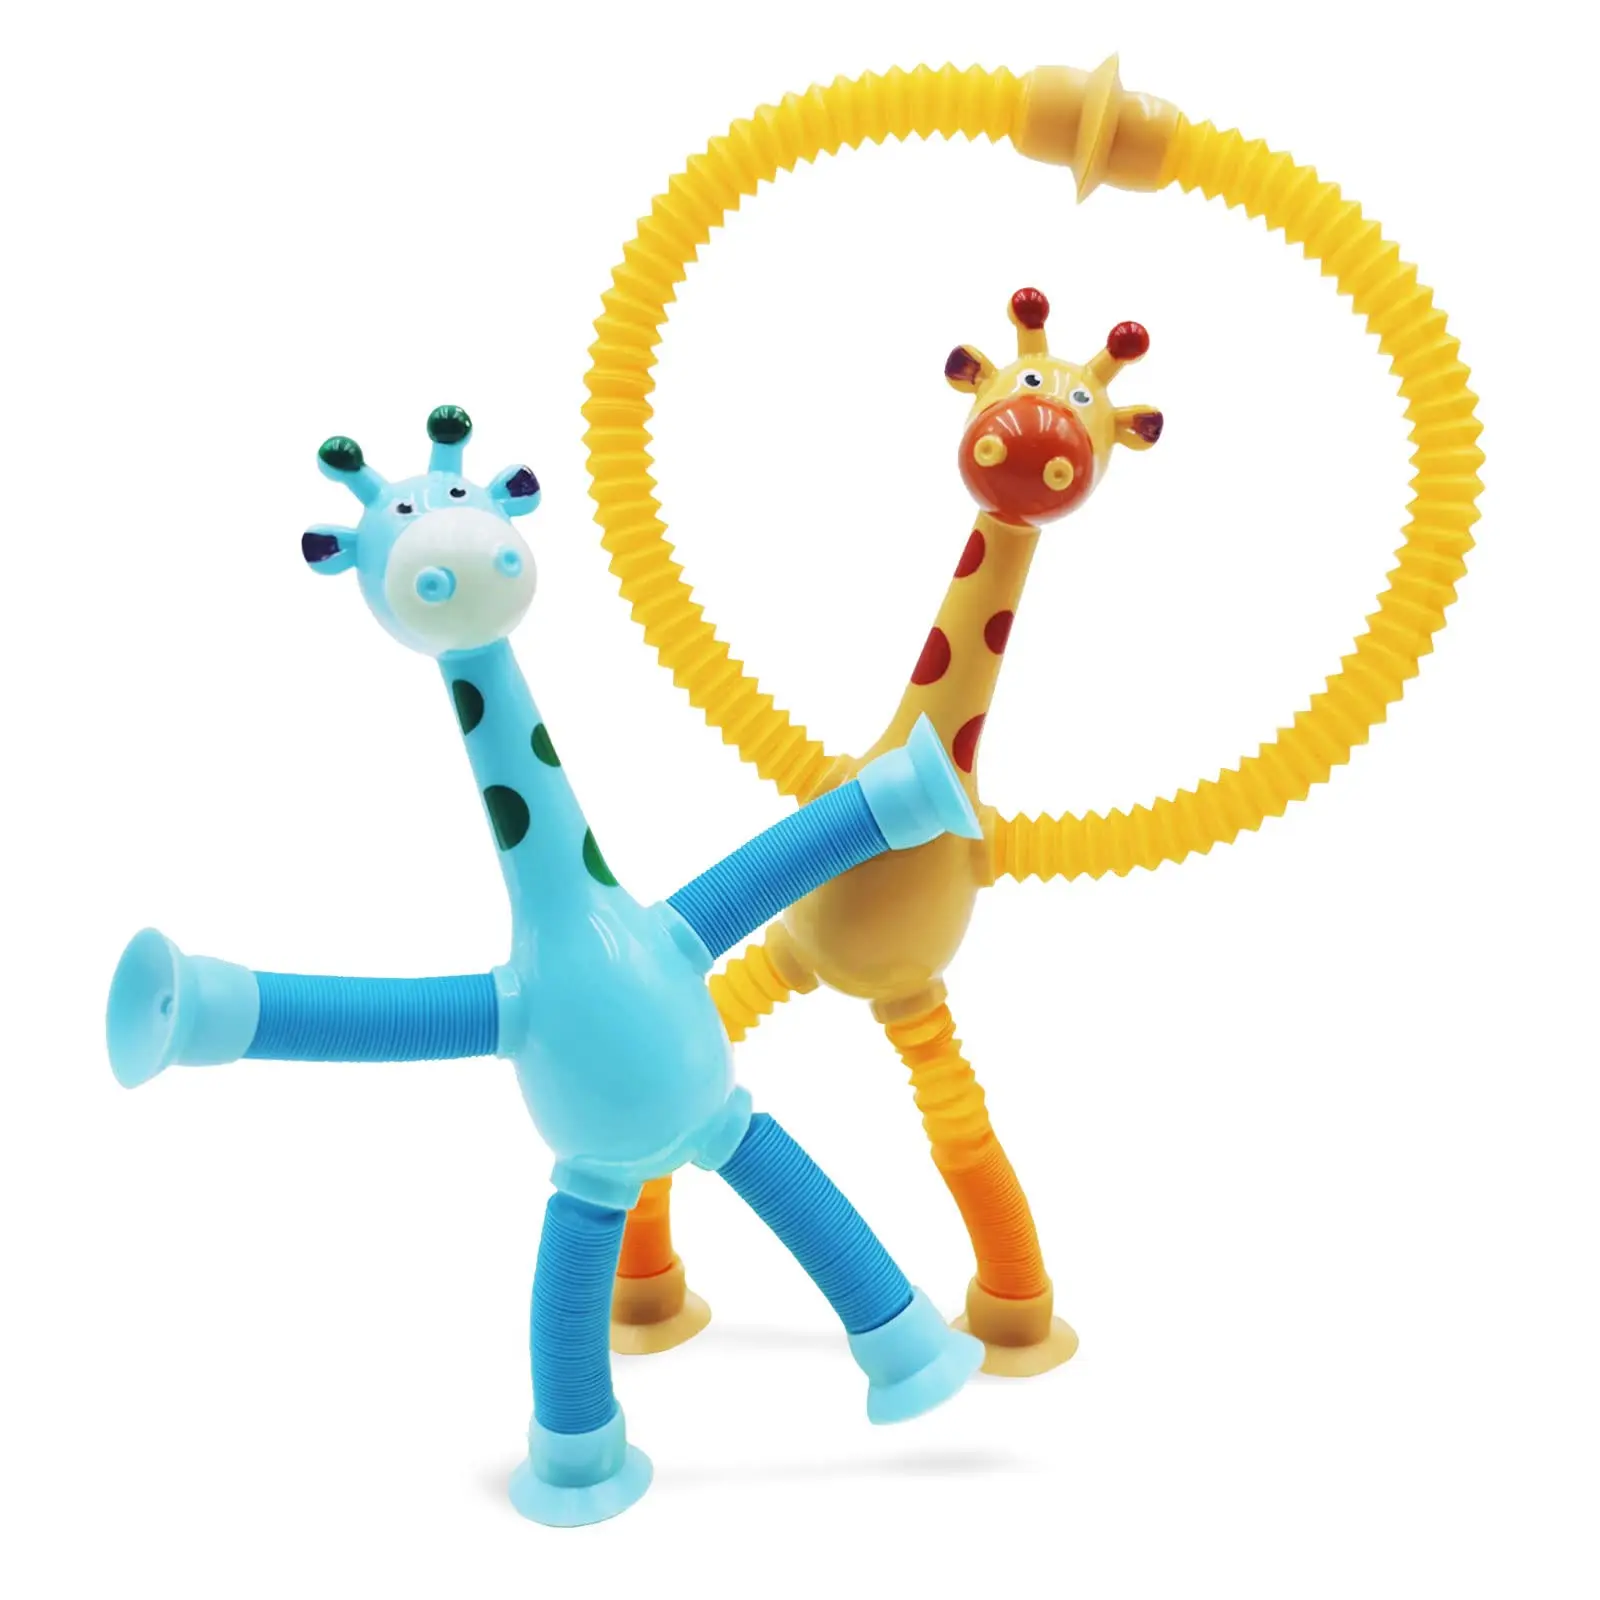 Children Suction Cup Toys Pop Tubes Stress Relief Telescopic Giraffe Fidget Toys Sensory Bellows Toys Anti-stress Squeeze Toy